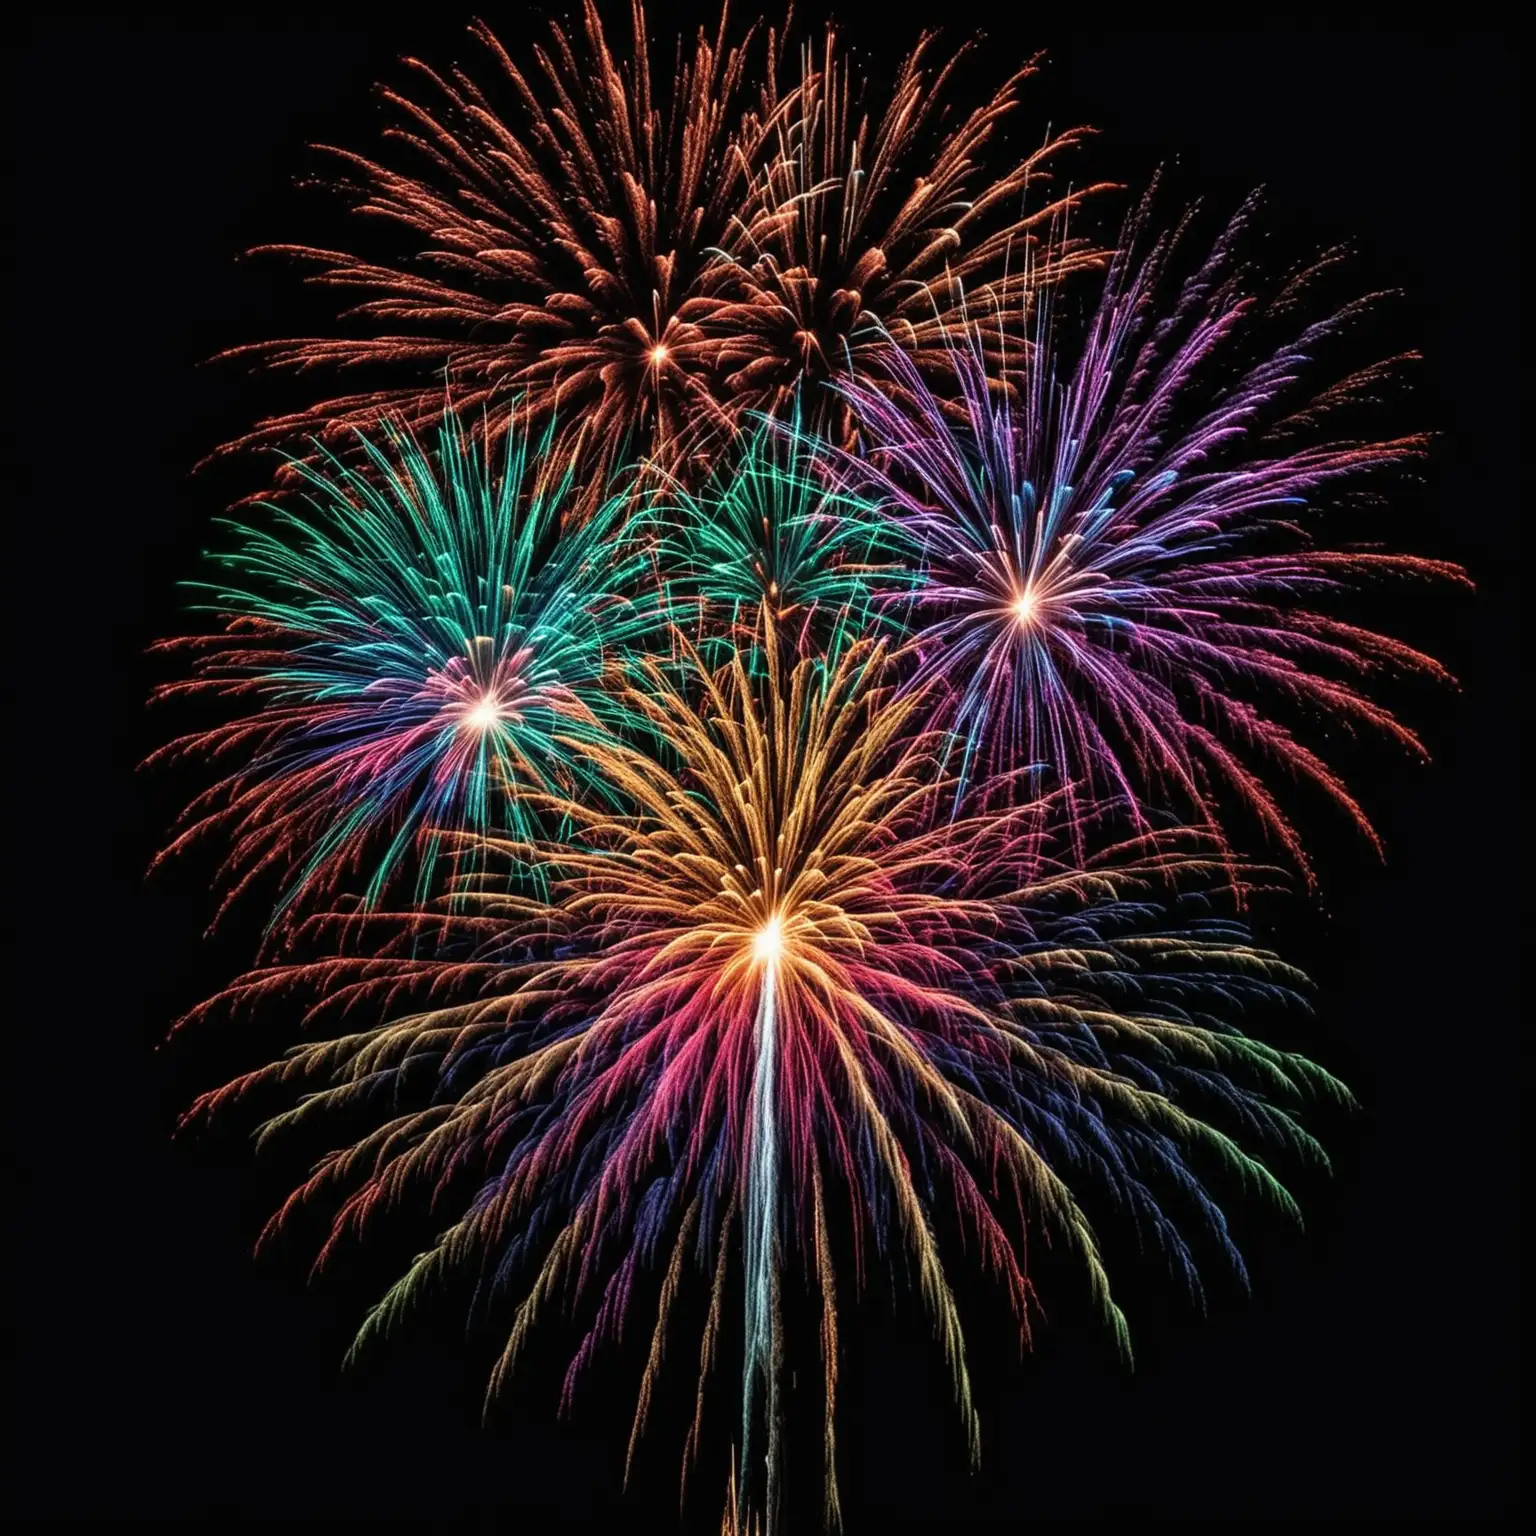 Vibrant MultiColored Fireworks Exploding Against a PitchBlack Night Sky